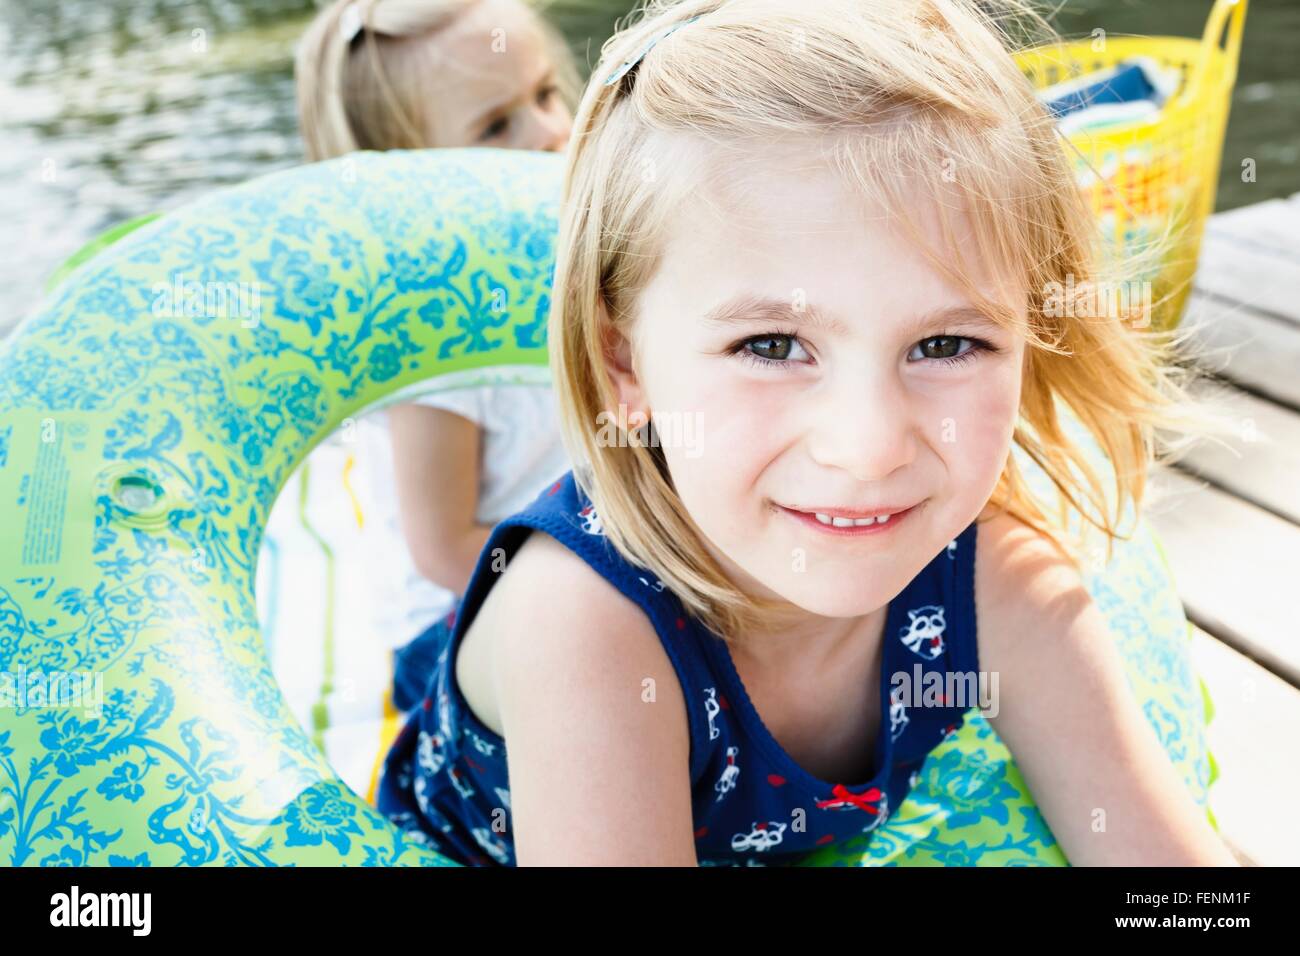 Portrait of cute girl playing with inflatable ring on pier at lake Starnberg, Bavaria, Germany Stock Photo